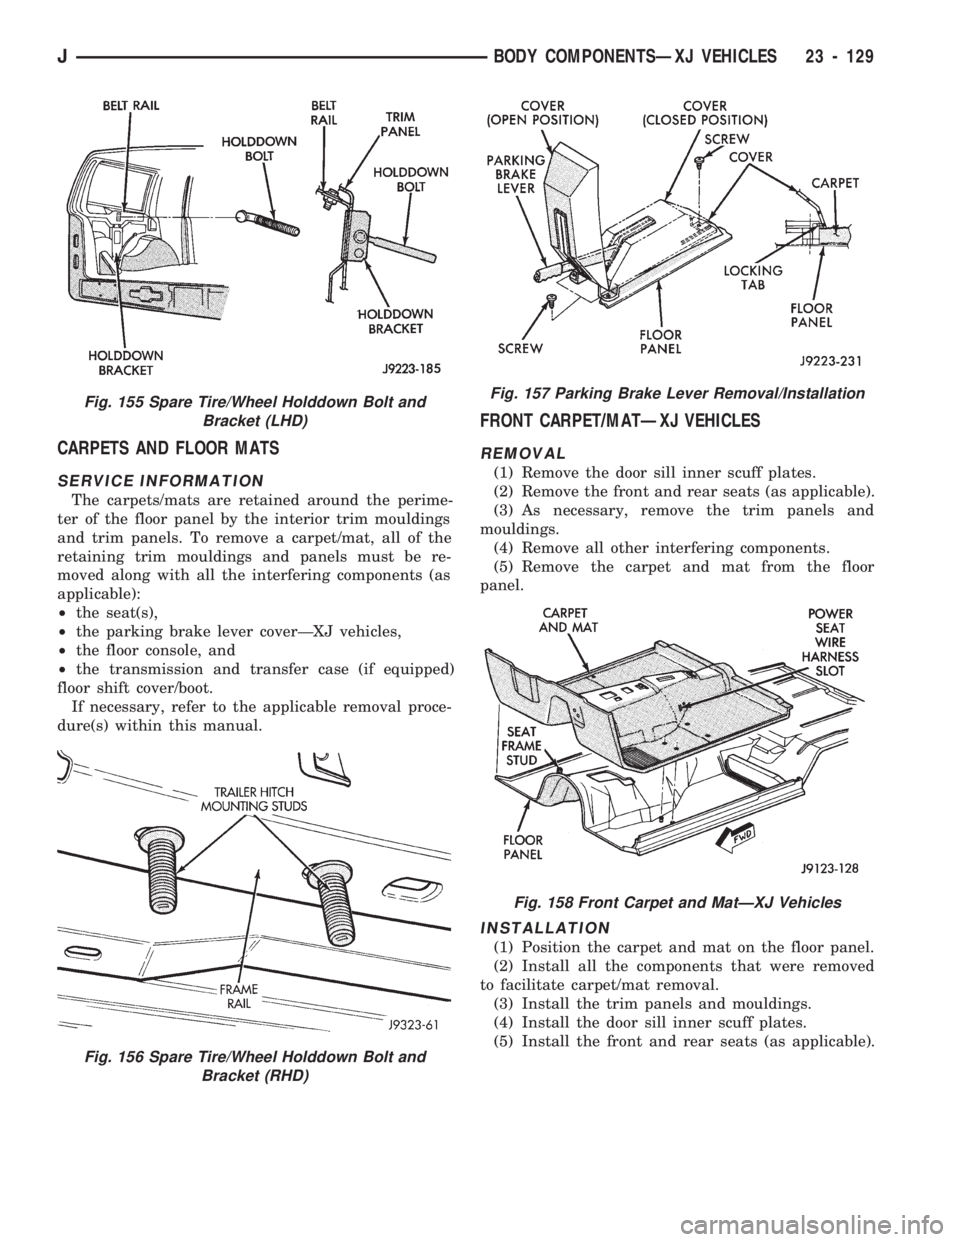 JEEP WRANGLER 1994  Owners Manual Fig. 155 Spare Tire/Wheel Holddown Bolt and
Bracket (LHD)Fig. 157 Parking Brake Lever Removal/Installation
Fig. 158 Front Carpet and MatÐXJ Vehicles
JBODY COMPONENTSÐXJ VEHICLES 23 - 129 